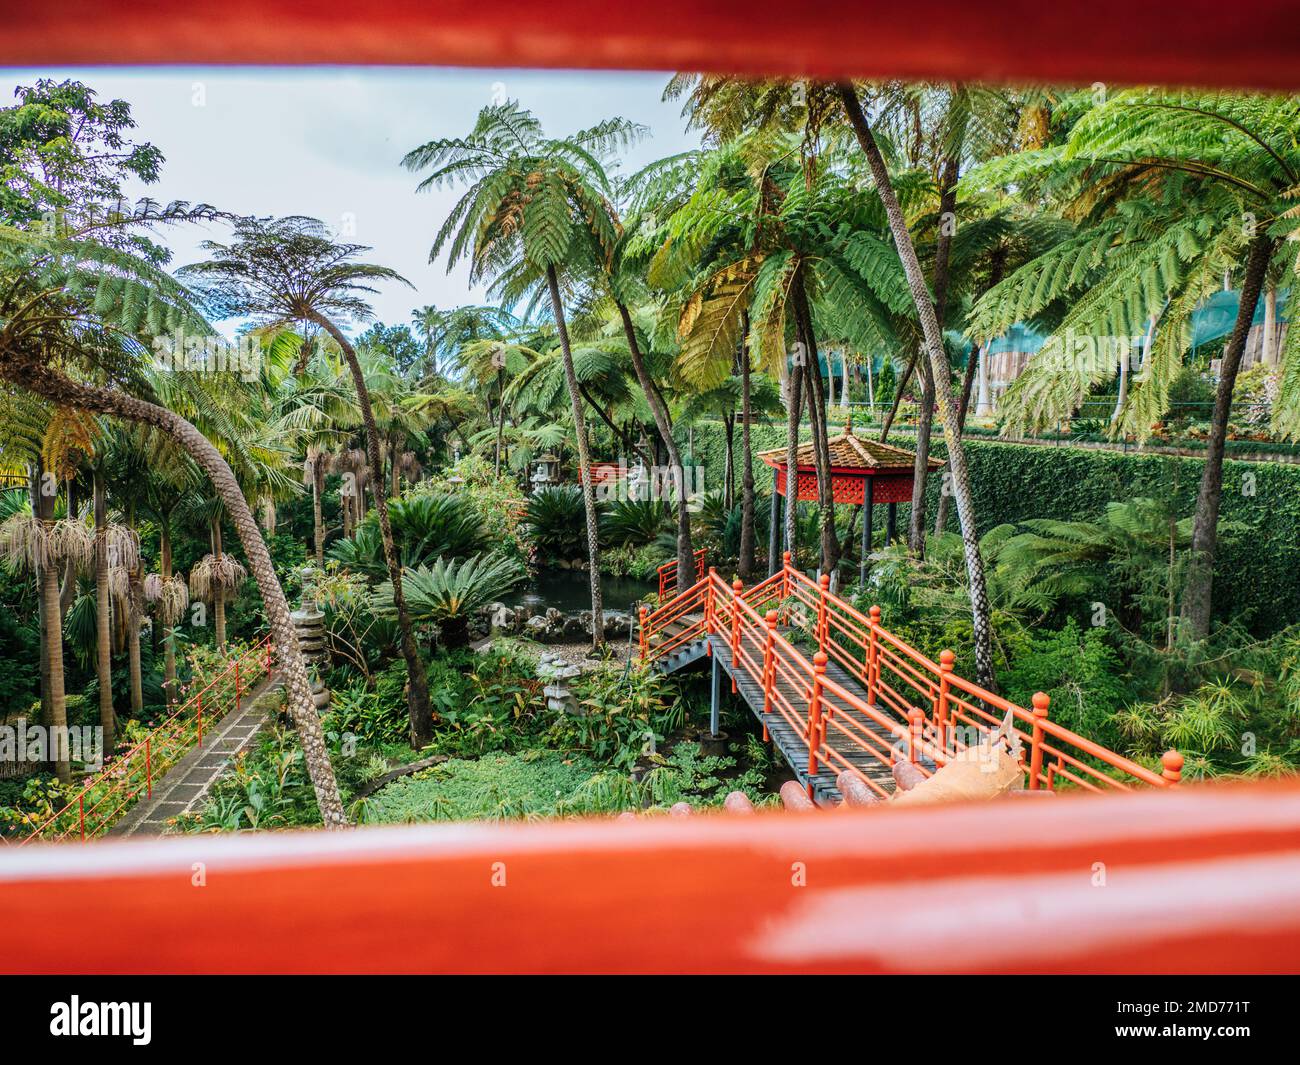 Monte Palace Tropical Garden on Madeira island, Portugal Stock Photo